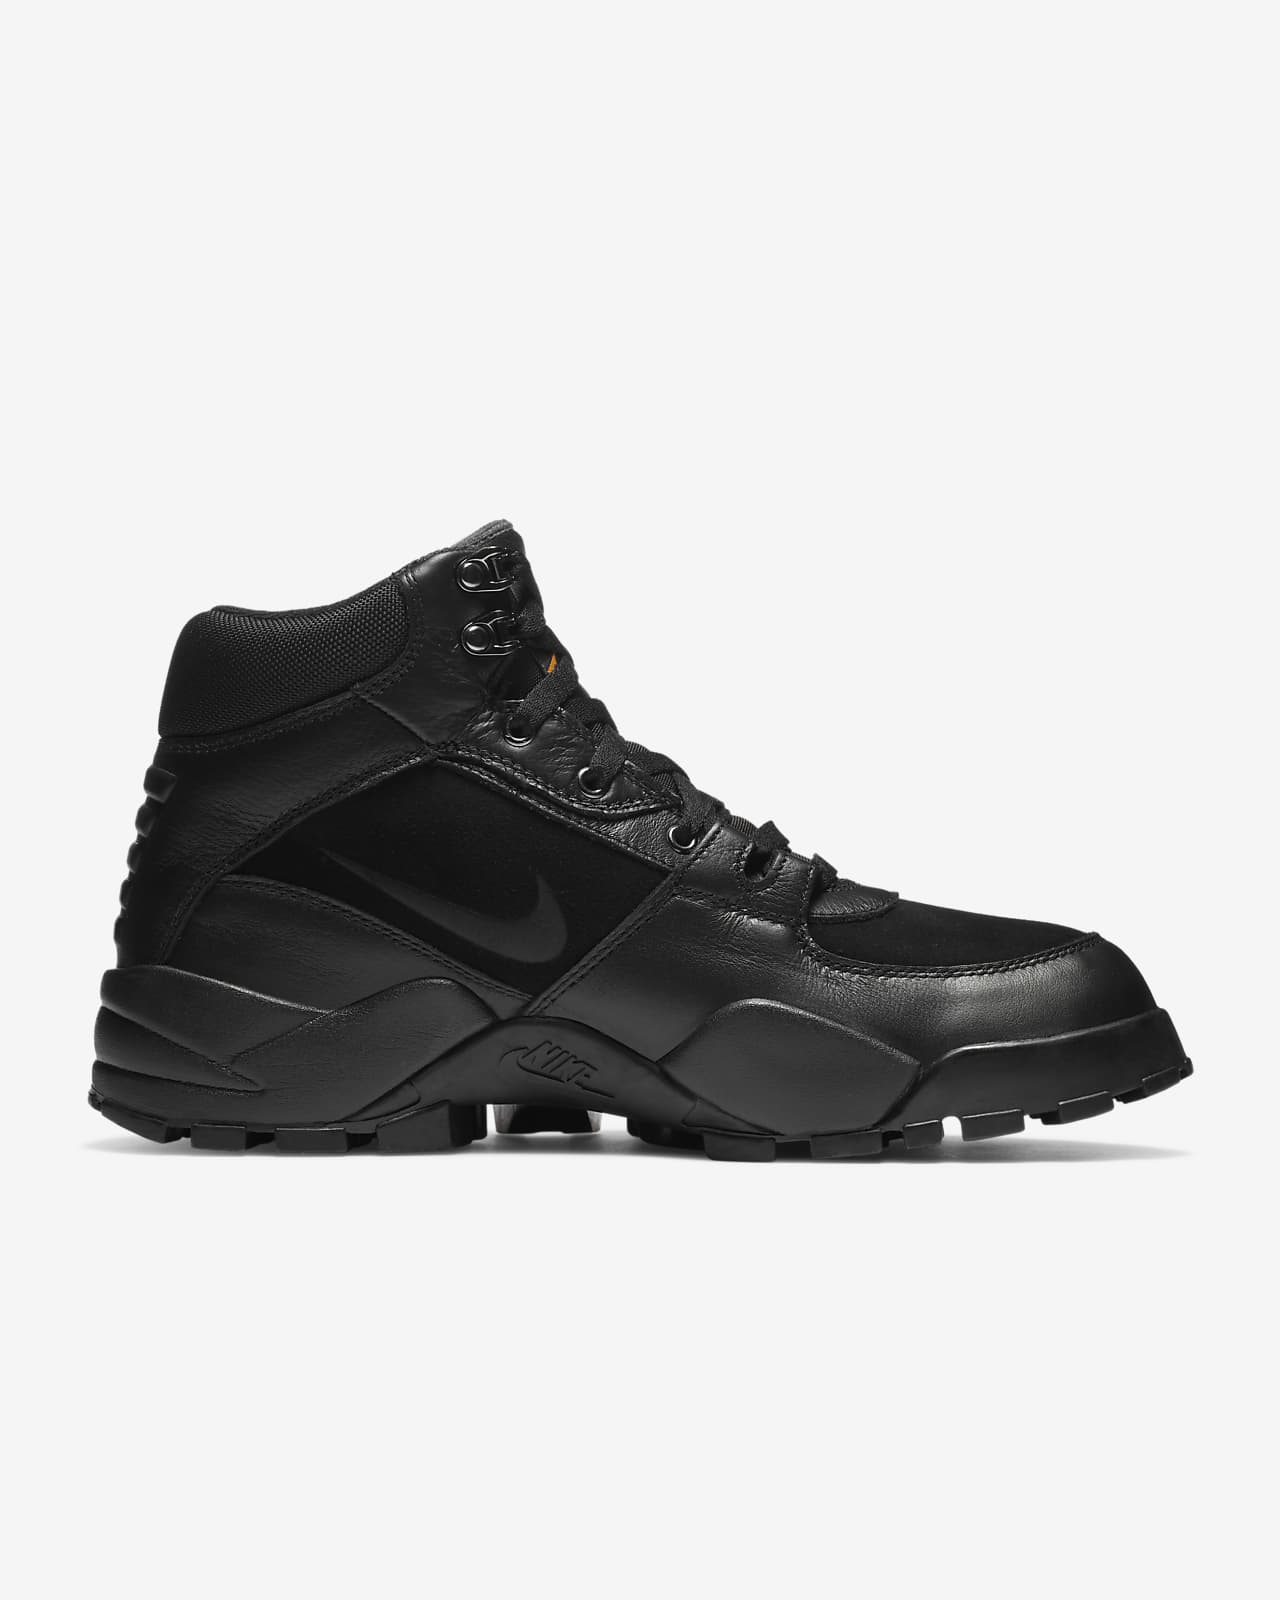 nike gore tex winter boots